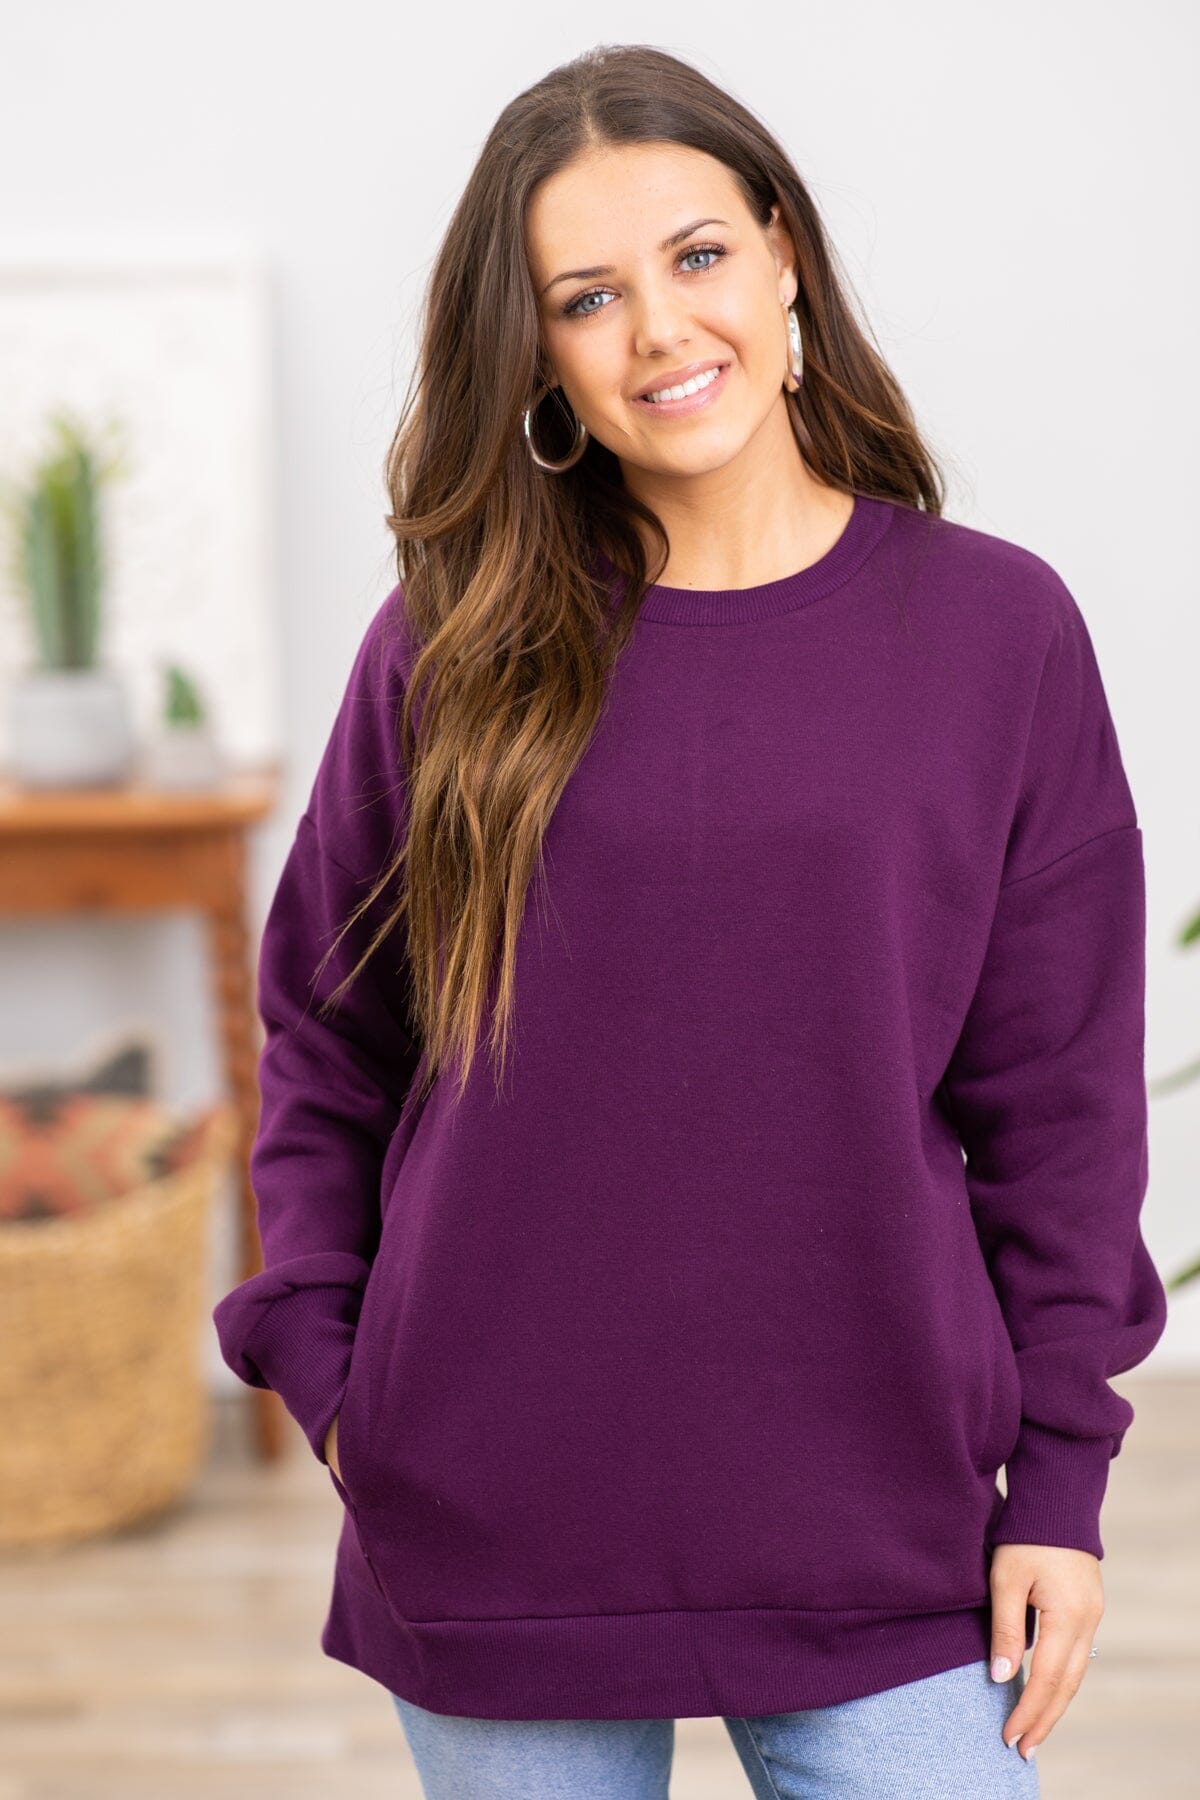 Eggplant Crew Neck Sweatshirt With Pockets - Filly Flair